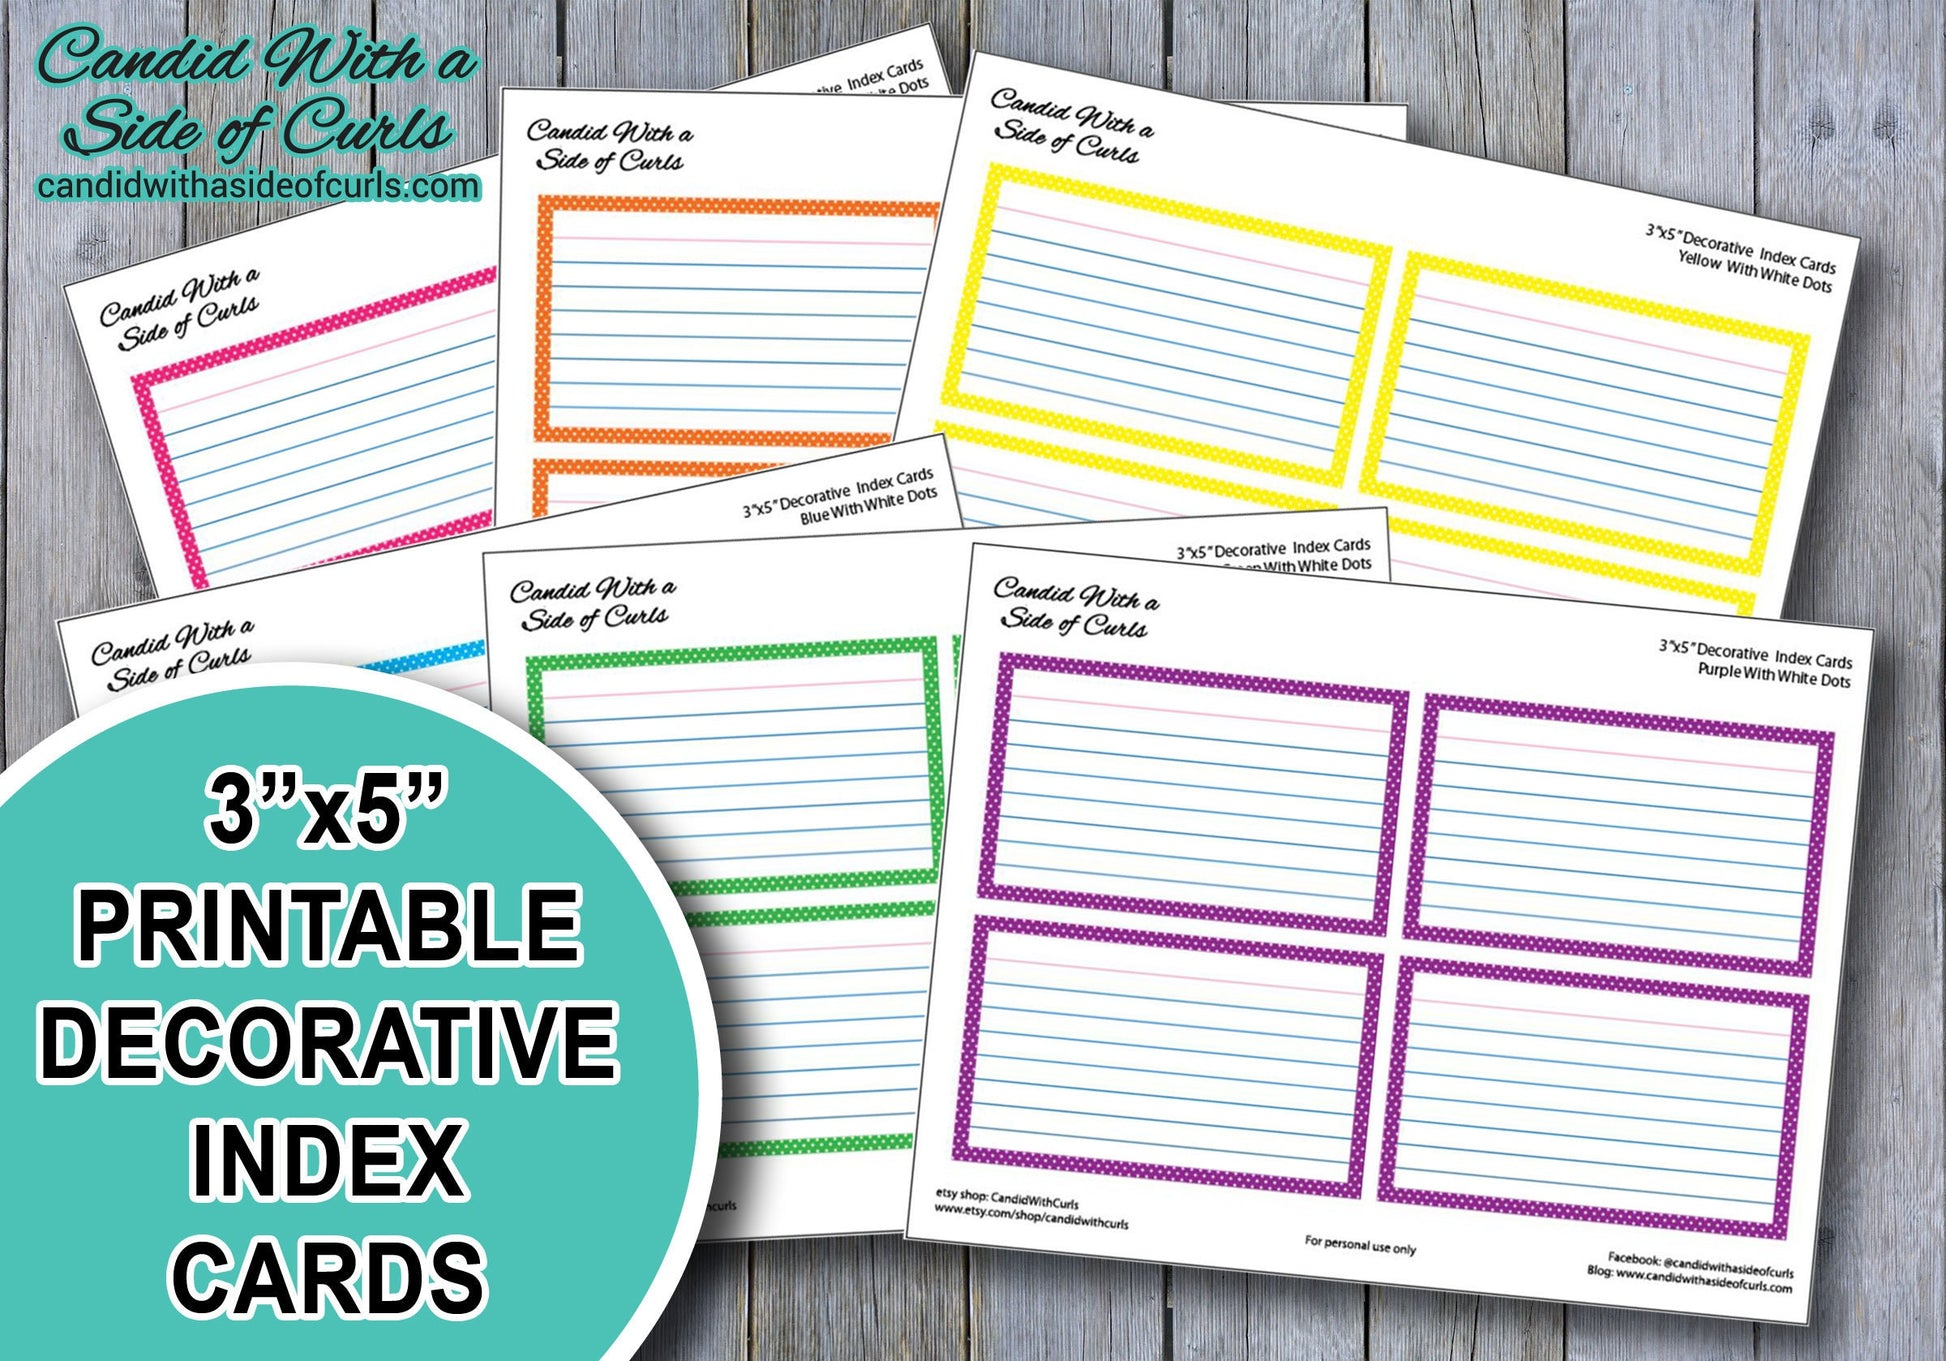 3x5 Printable Decorative Index Cards – Candid With a Side of Curls